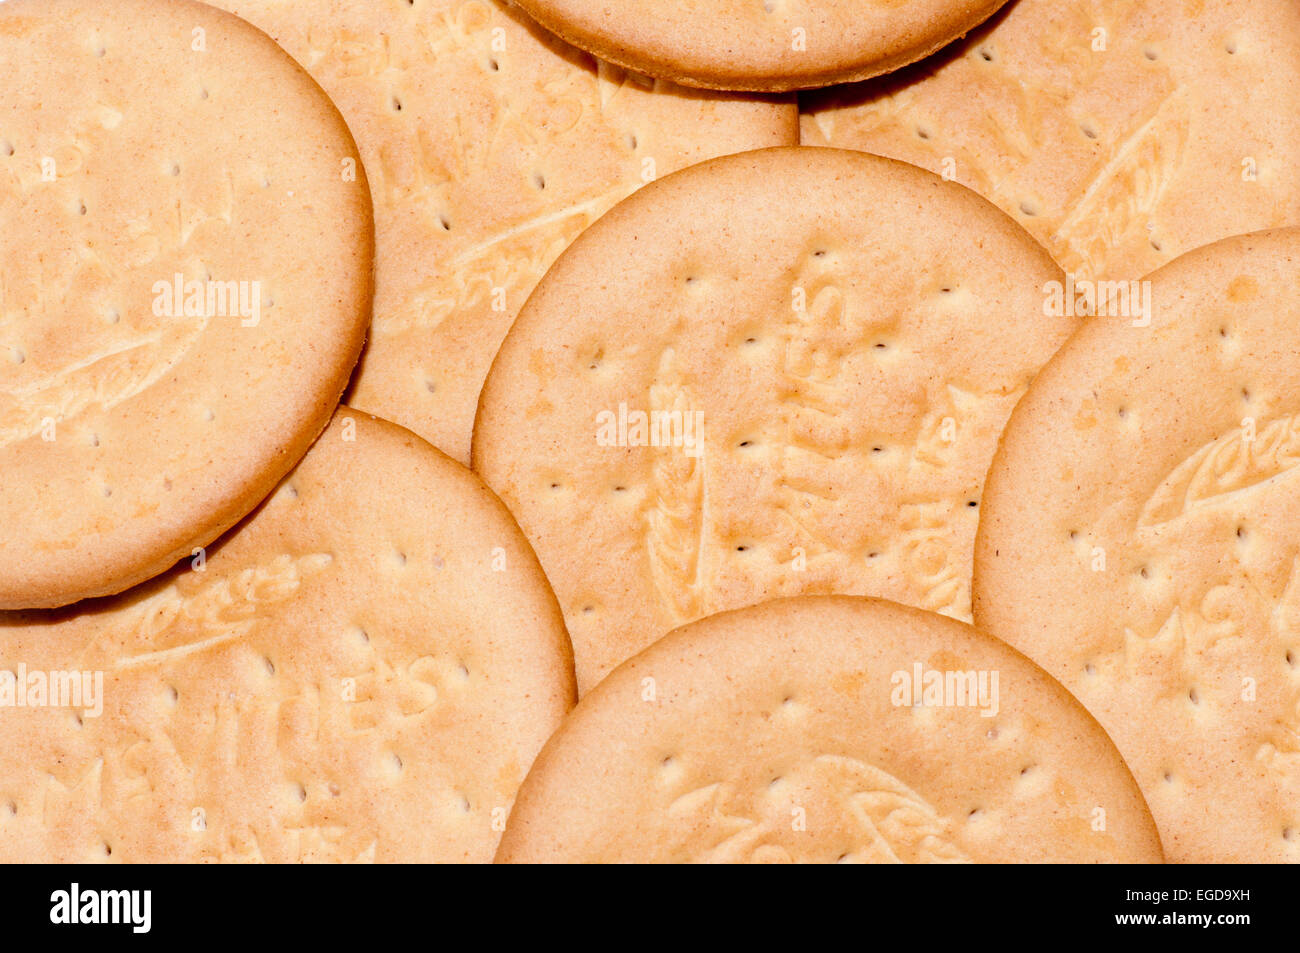 File:Biscuit - Delacre 02.jpg - Wikimedia Commons